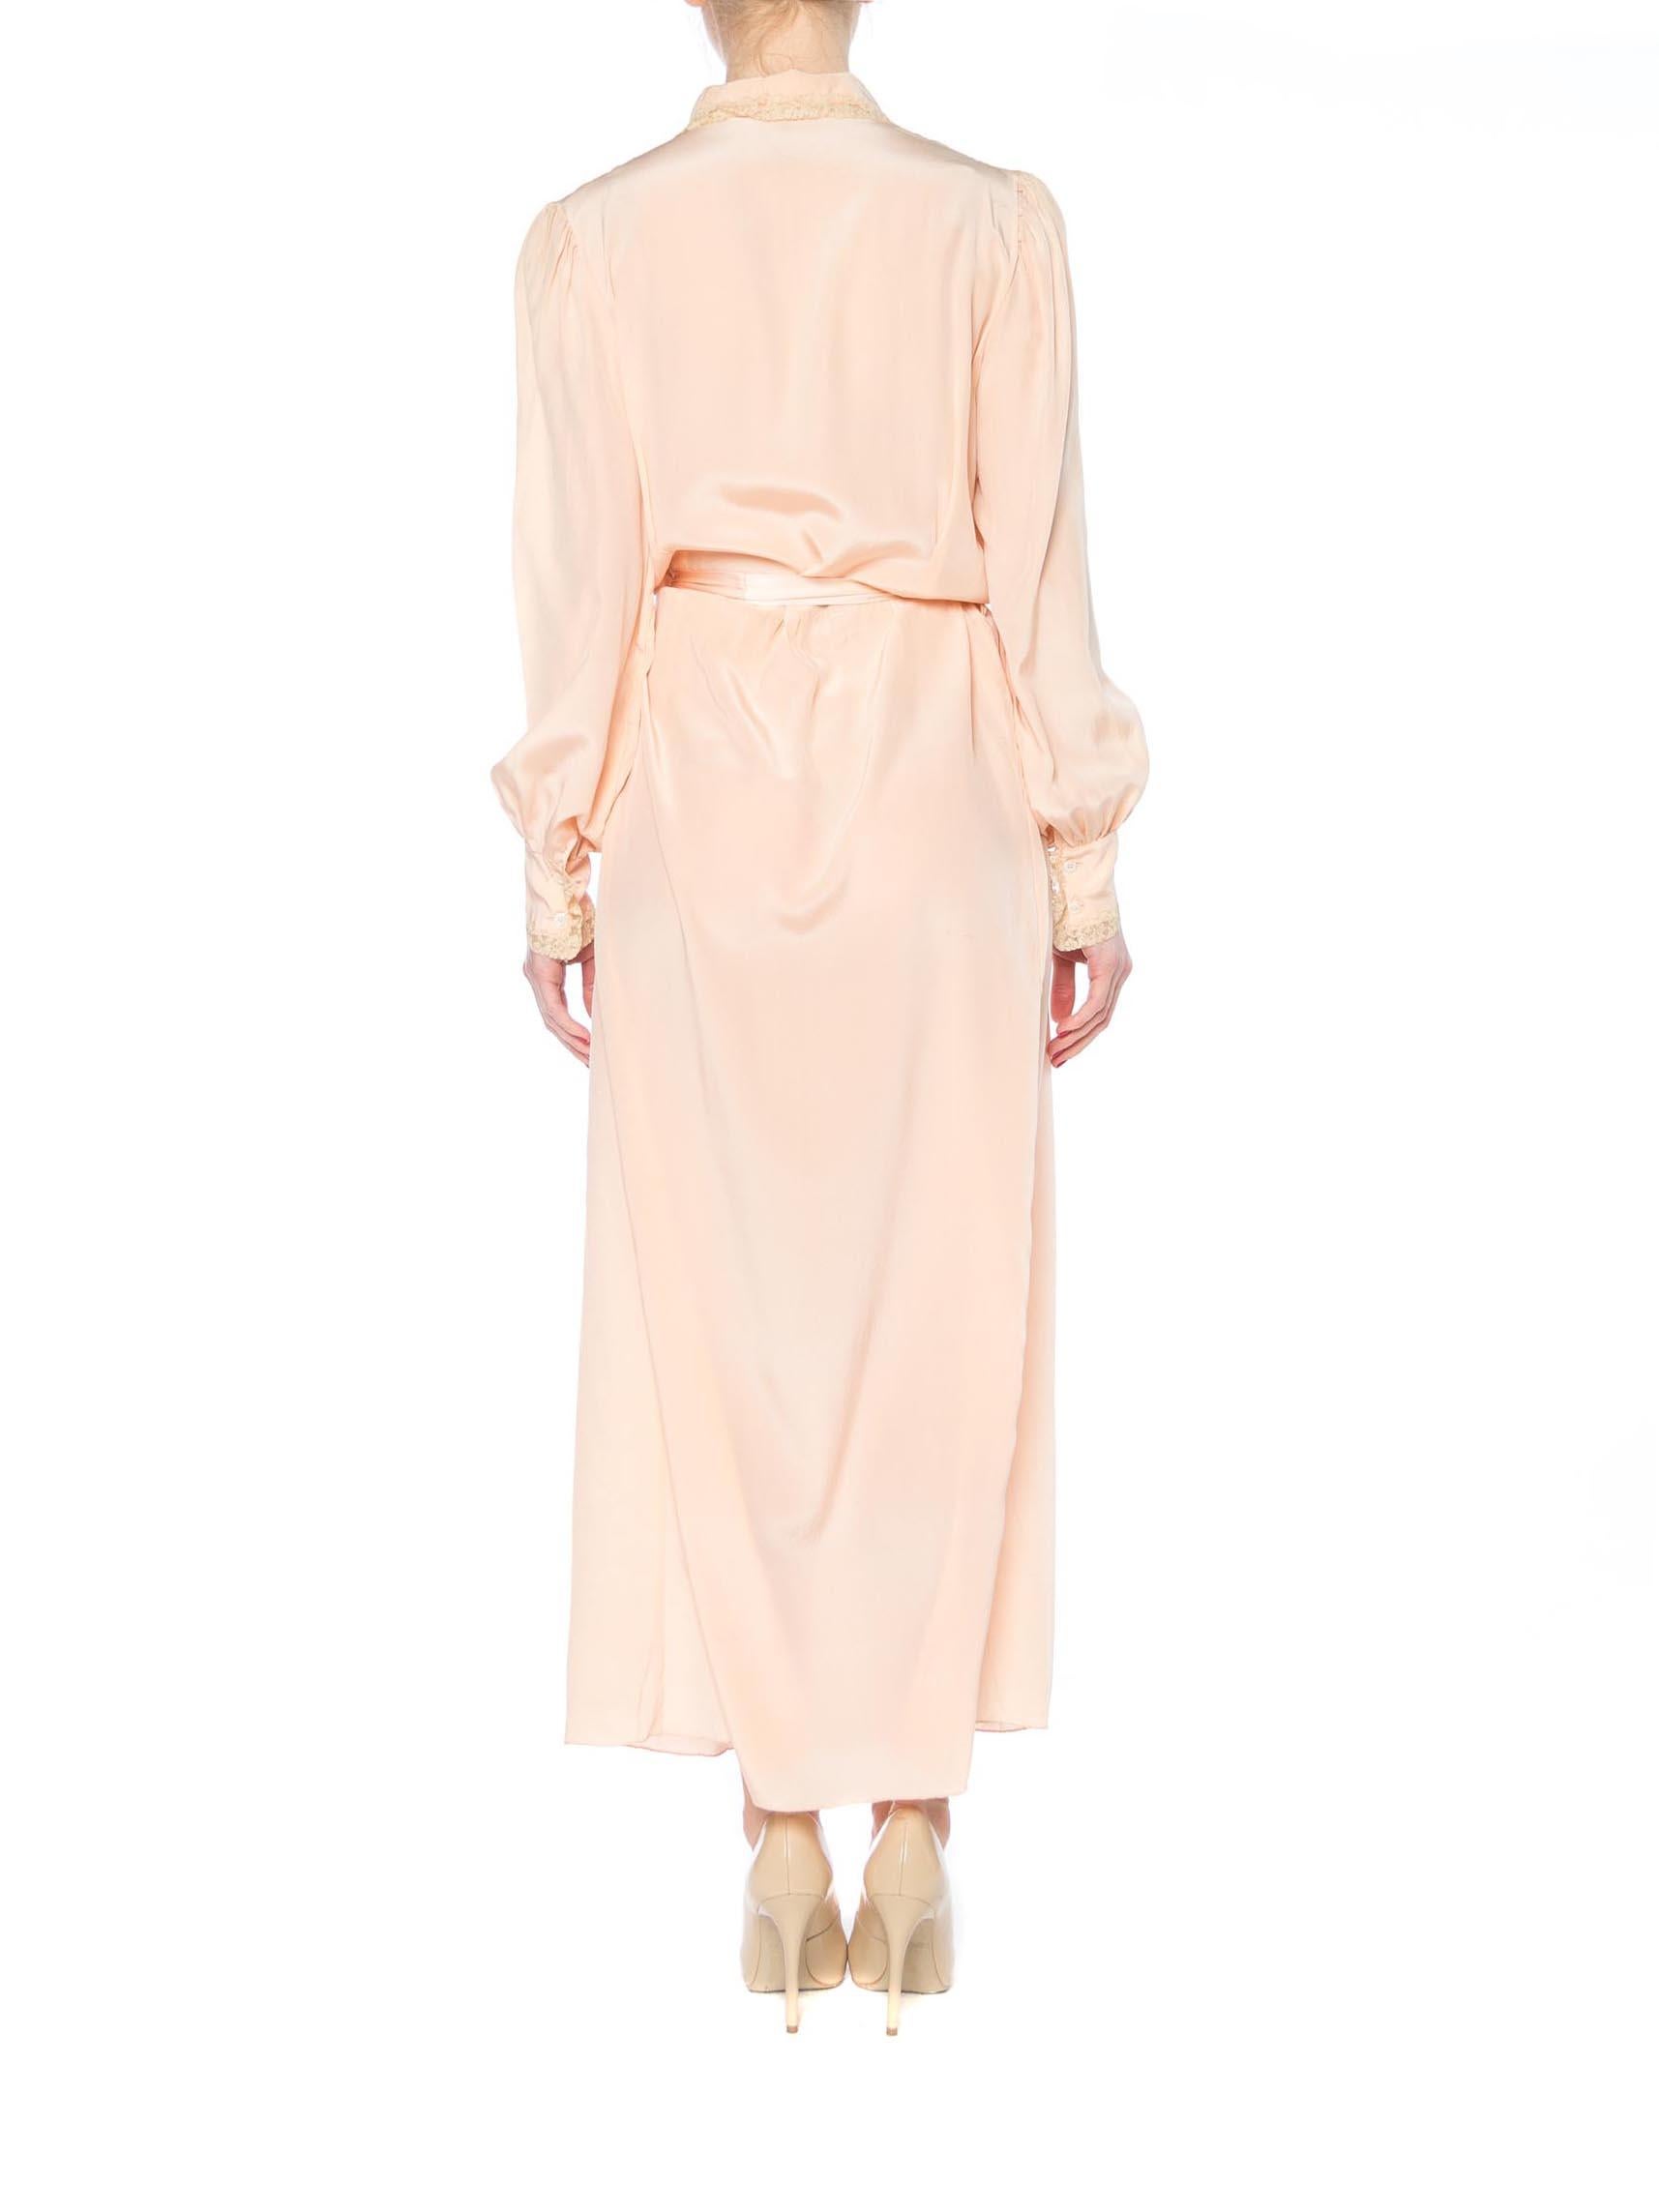 1930S Peach Bias Cut Silk Crepe De Chine Slip Dress With Sleeves & Belt In Excellent Condition For Sale In New York, NY